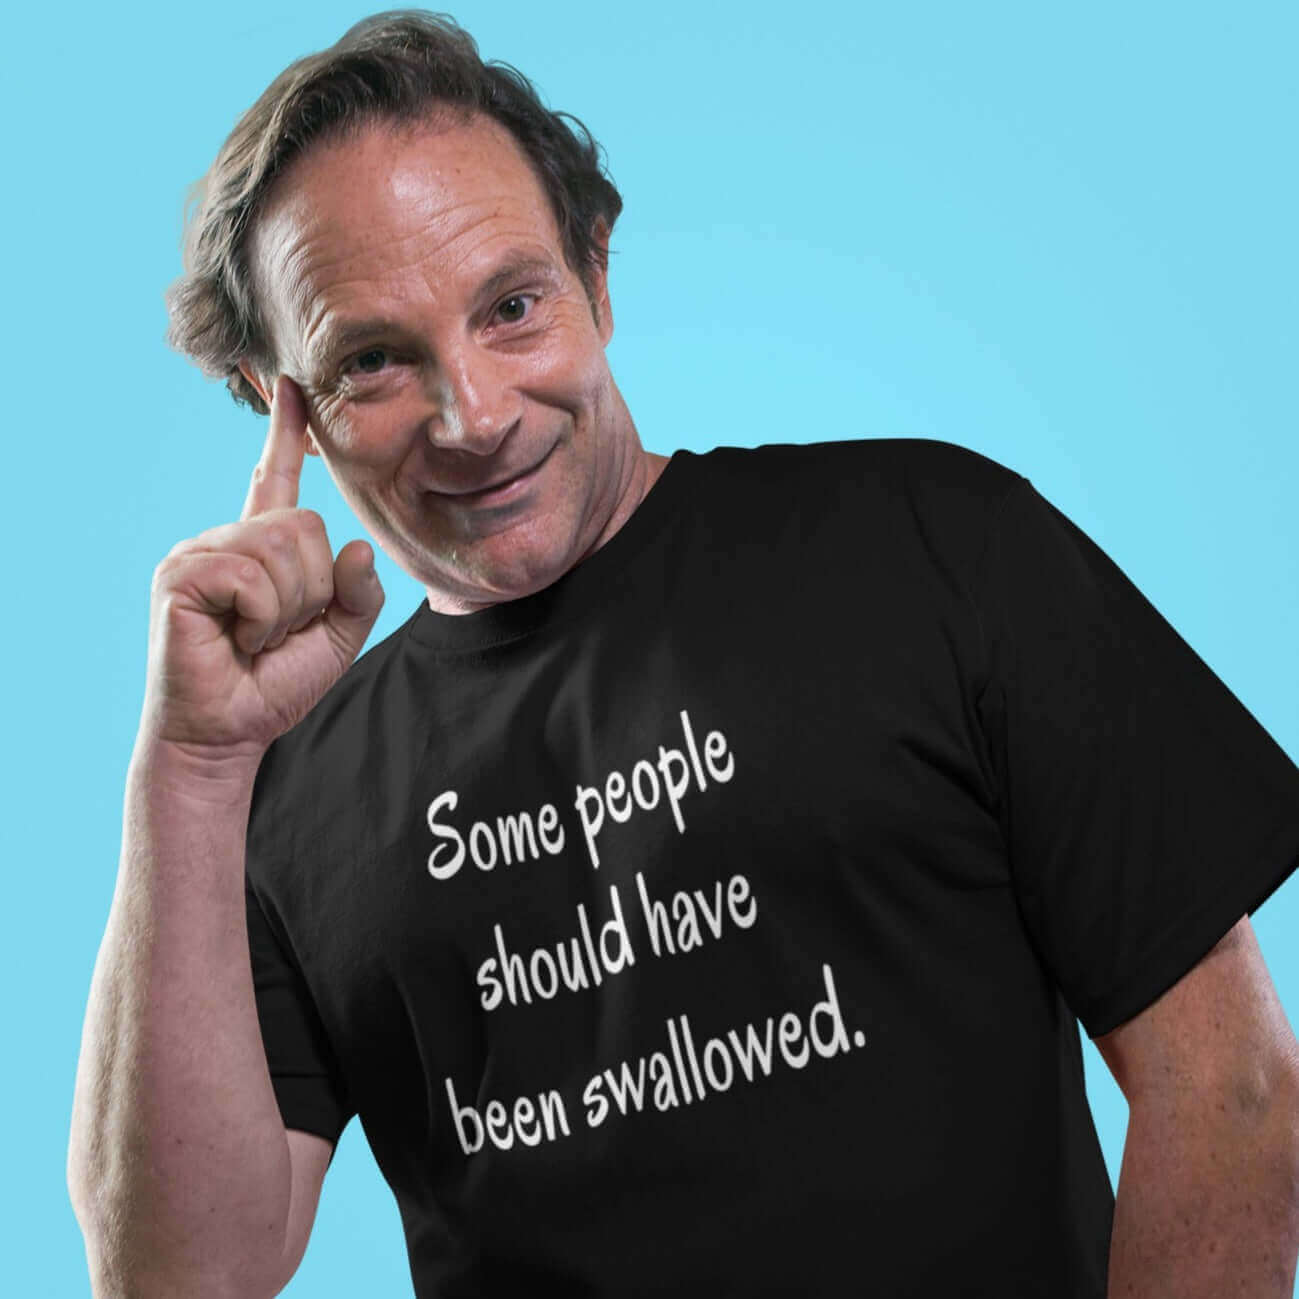 Man wearing black t-shirt with the phrase Some people should have been swallowed printed on the front.